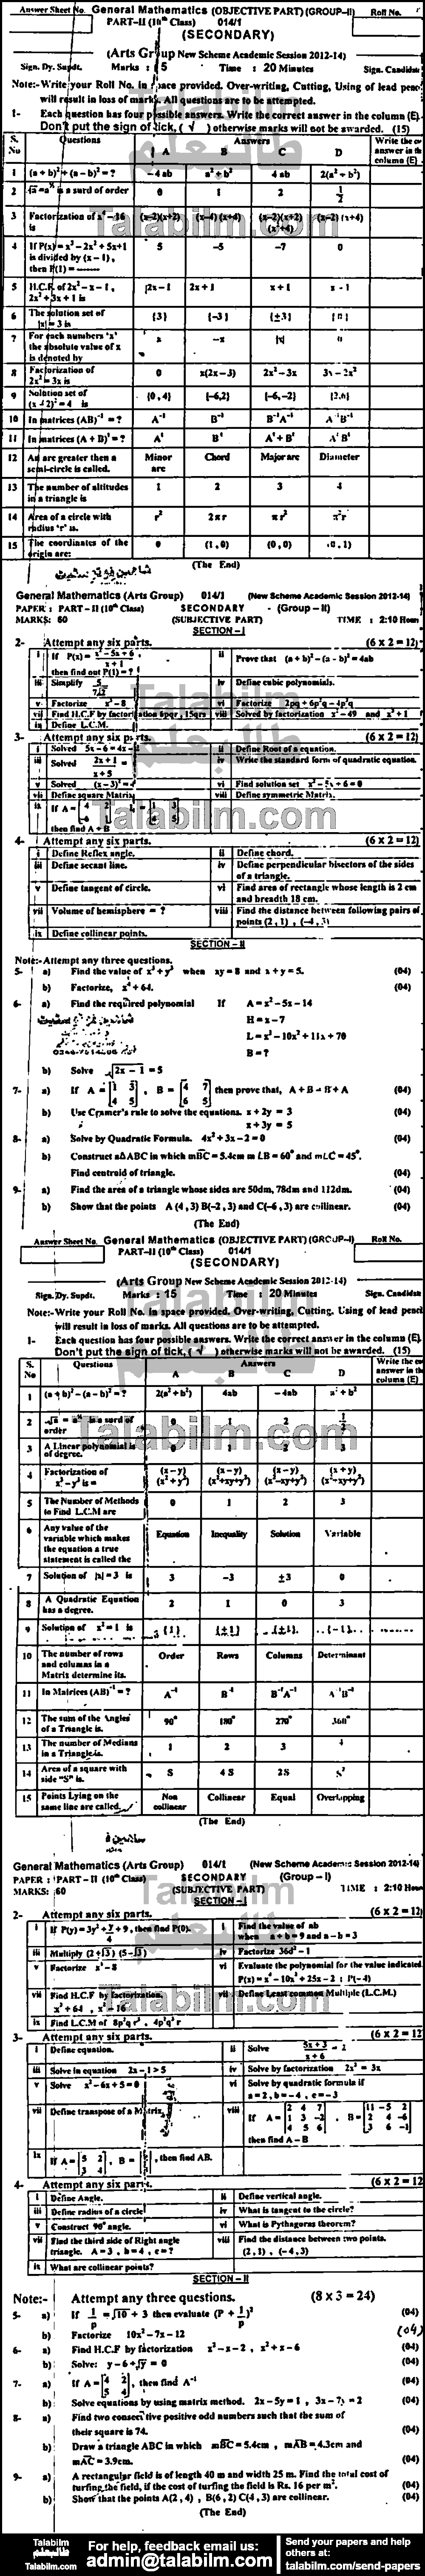 General Math 0 past paper for English Medium 2014 Group-I